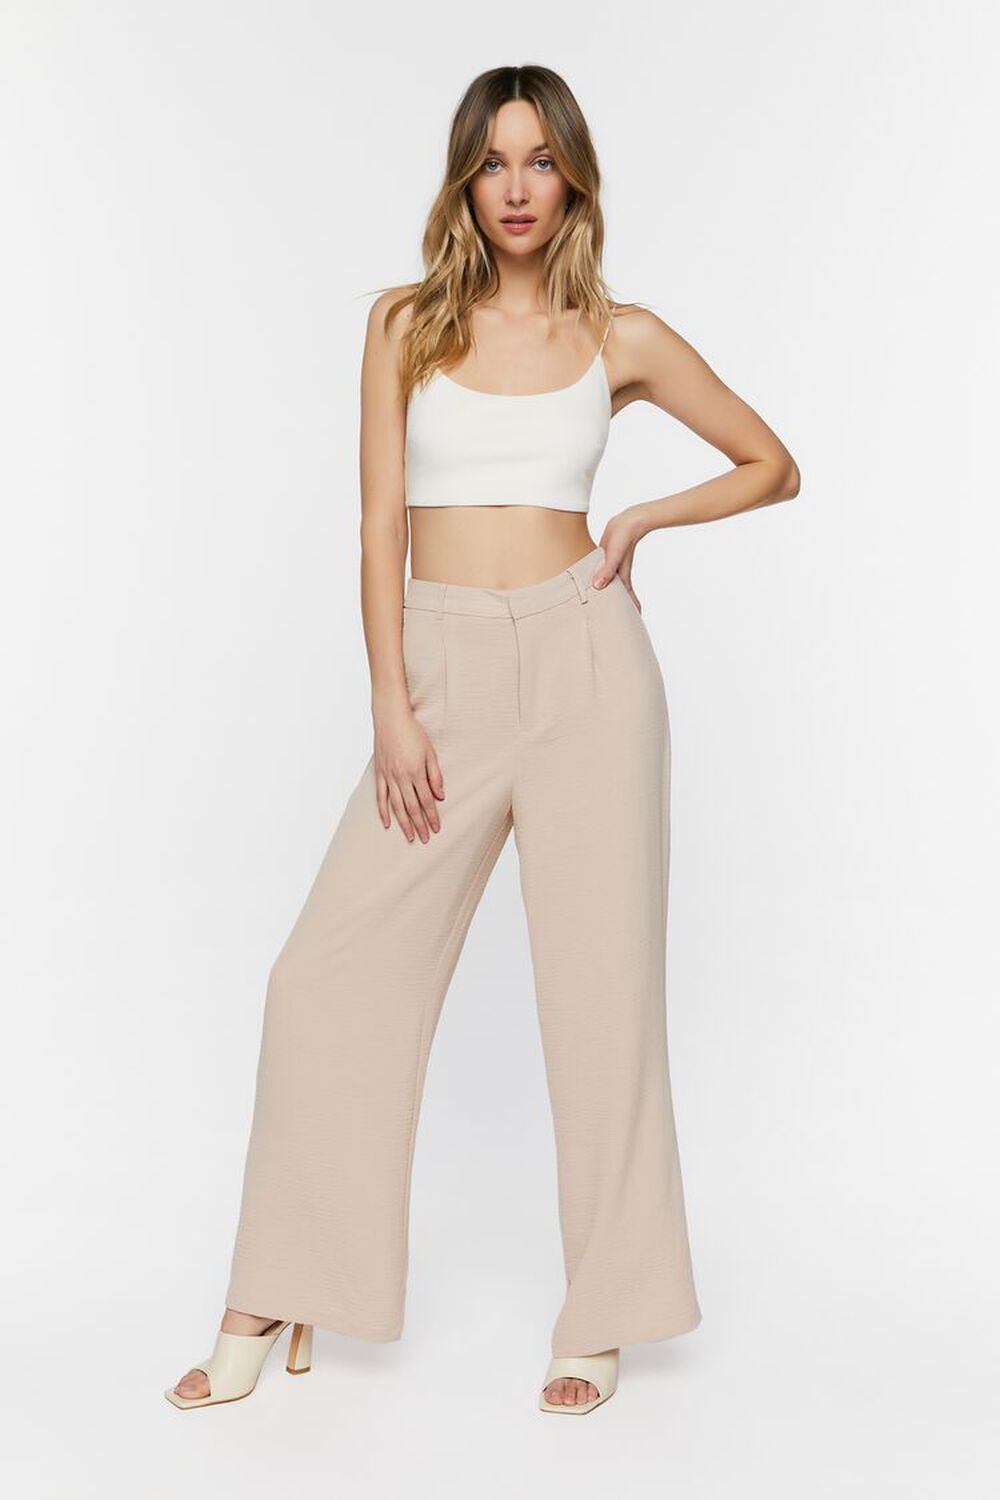 TAUPE Textured High-Rise Trousers, image 1